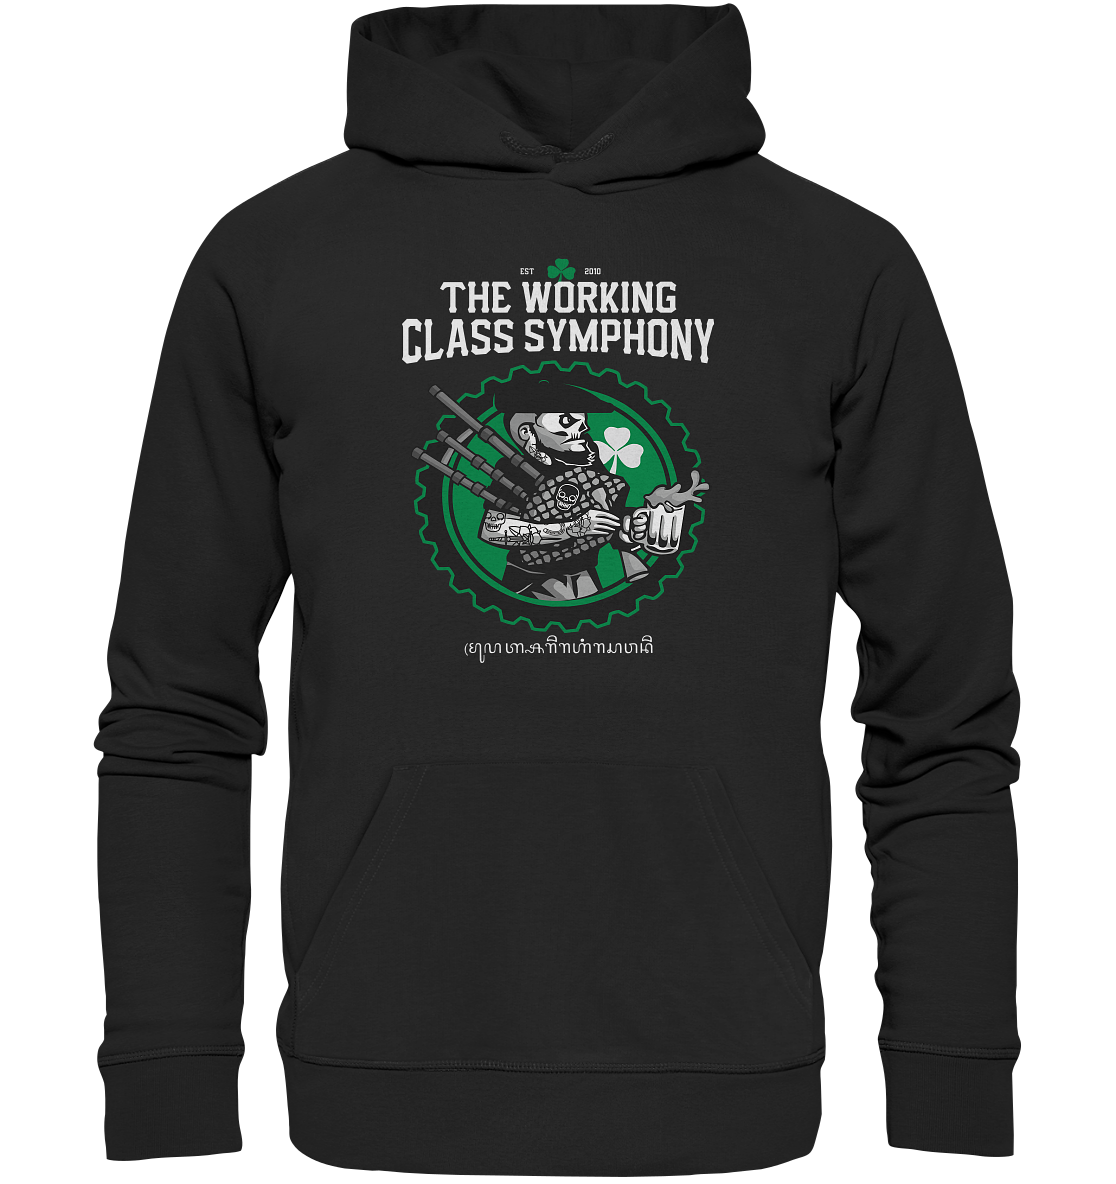 The Working Class Symphony "Piper" - Premium Unisex Hoodie